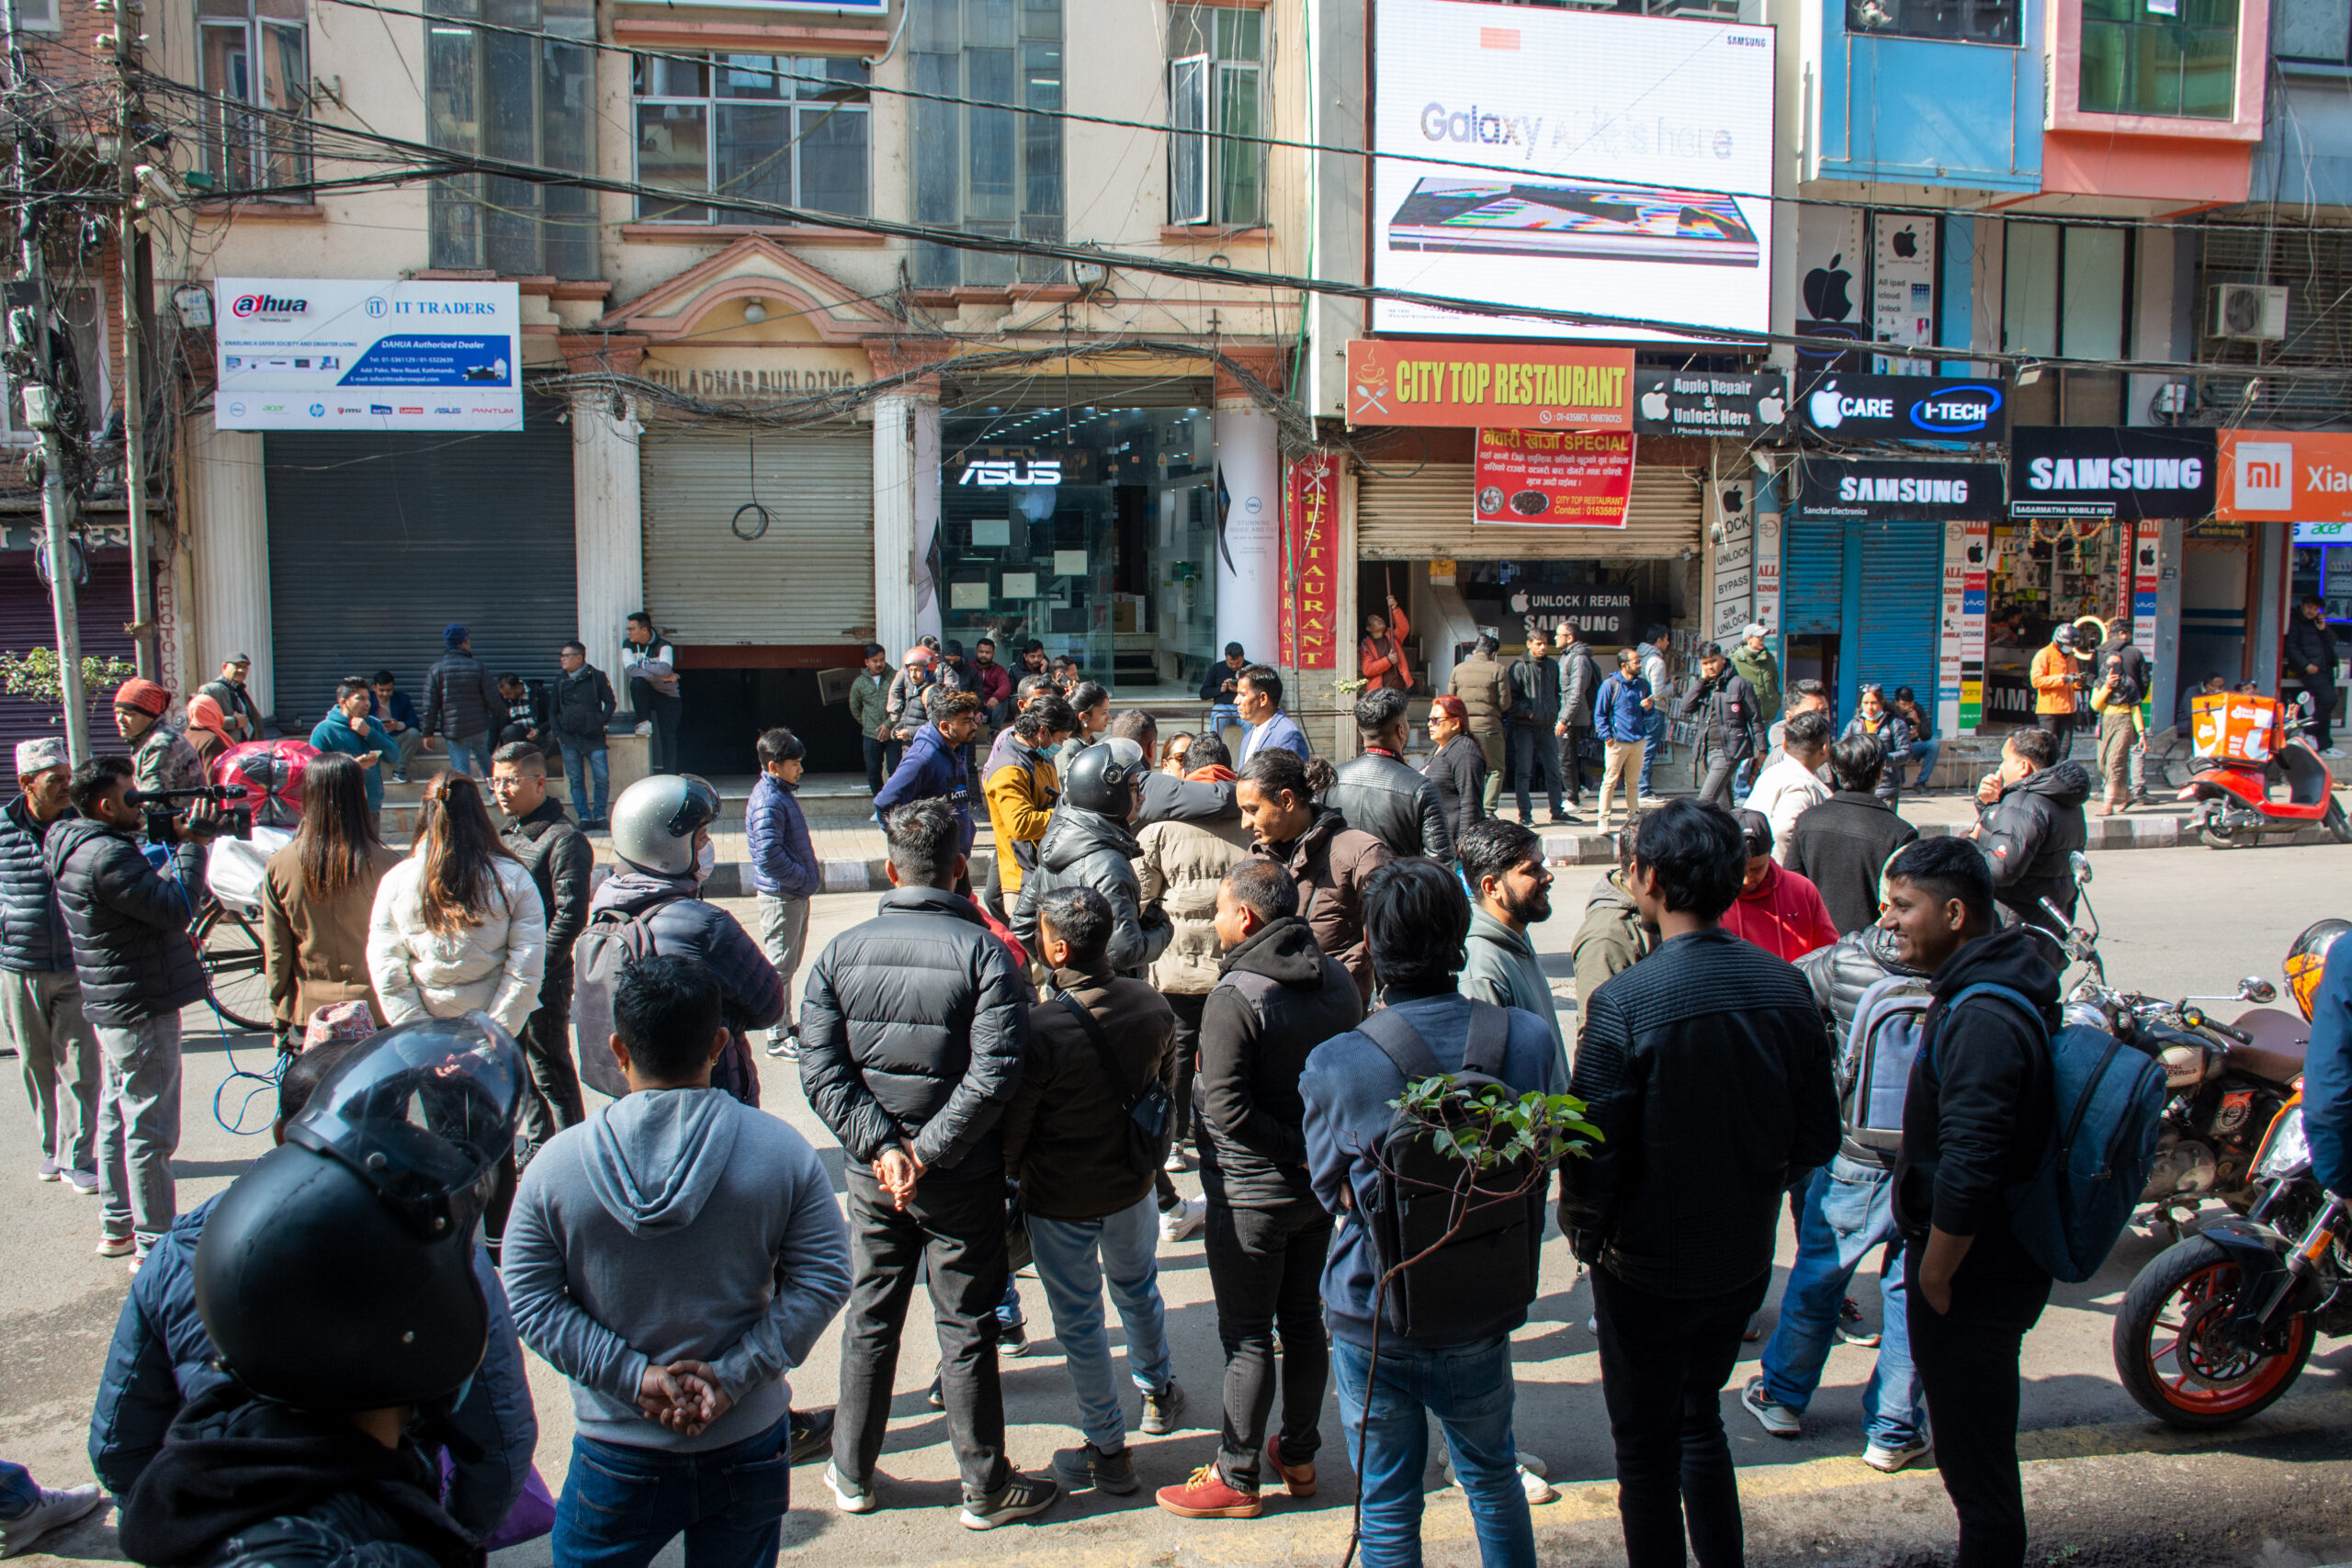 Protests emerge in response to New Road parking ban in Kathmandu ...